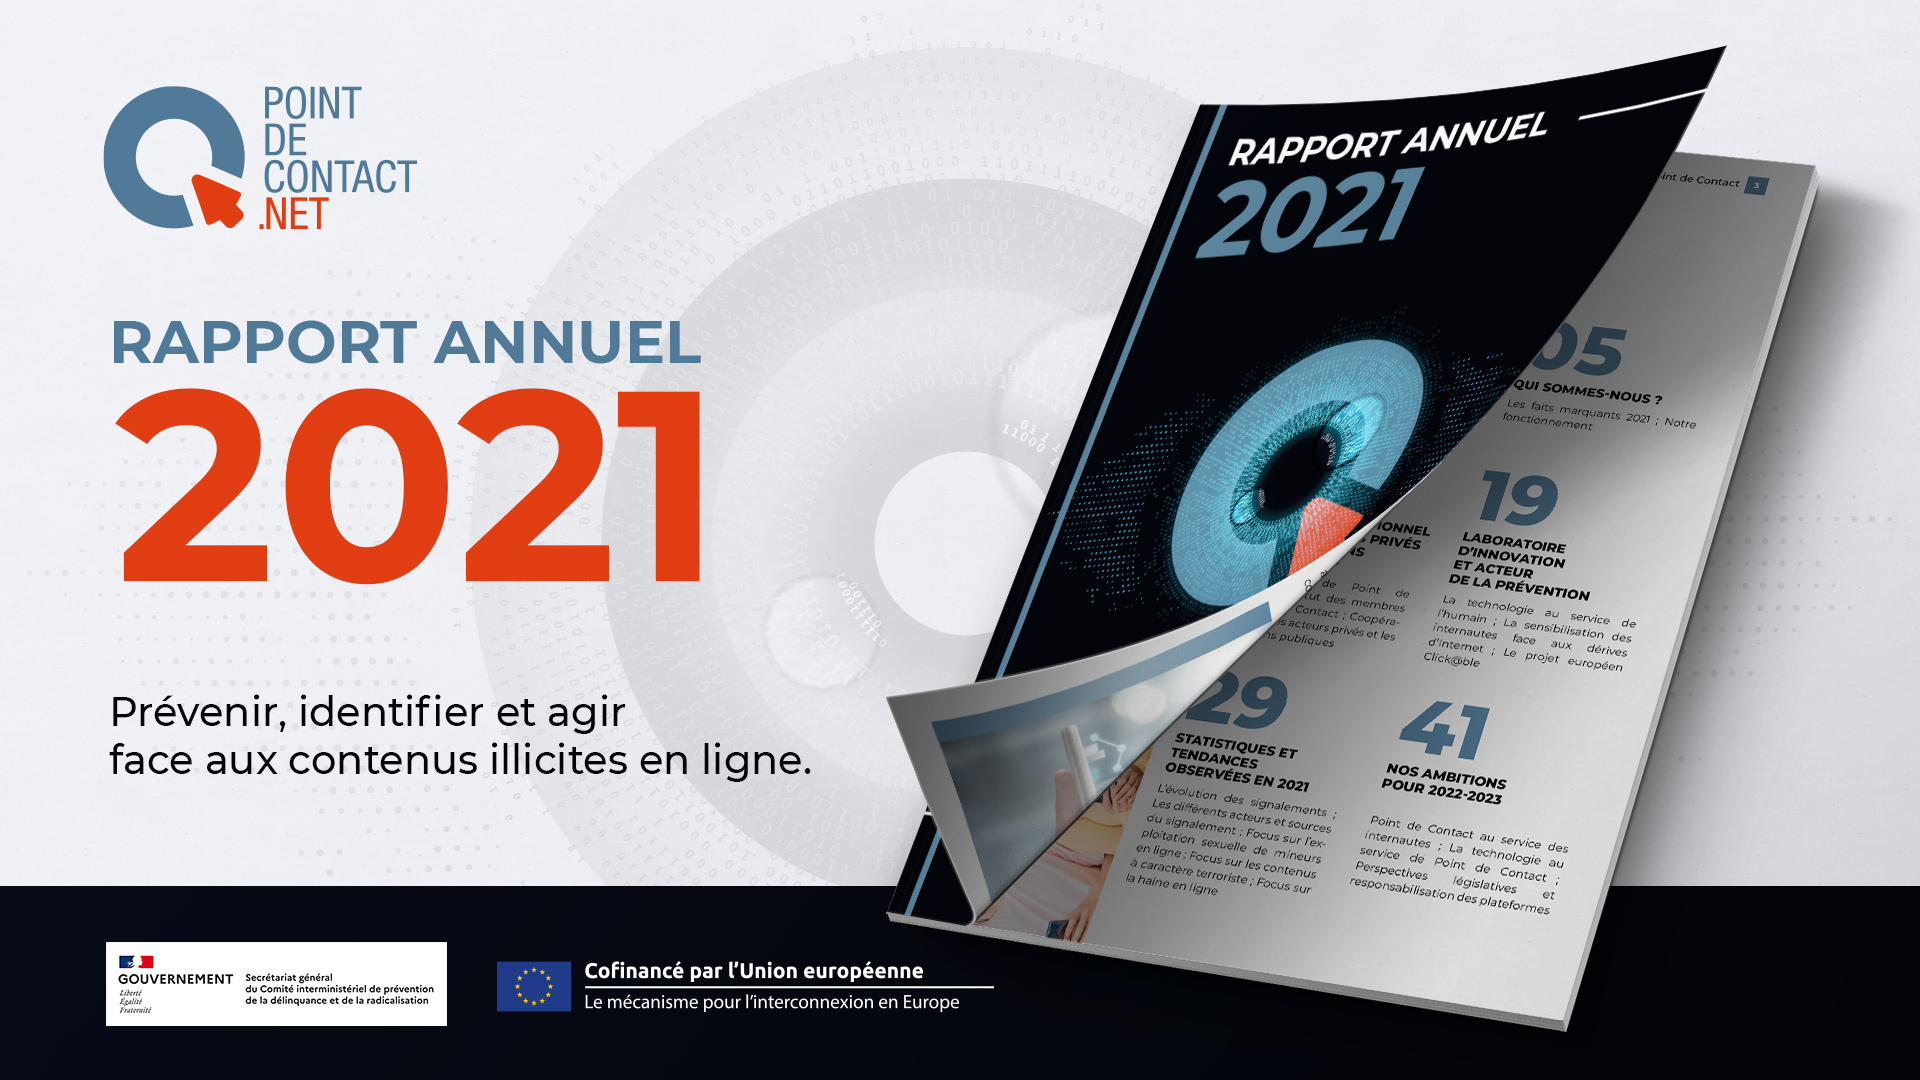 Point de Contact launches 2021 Annual Report